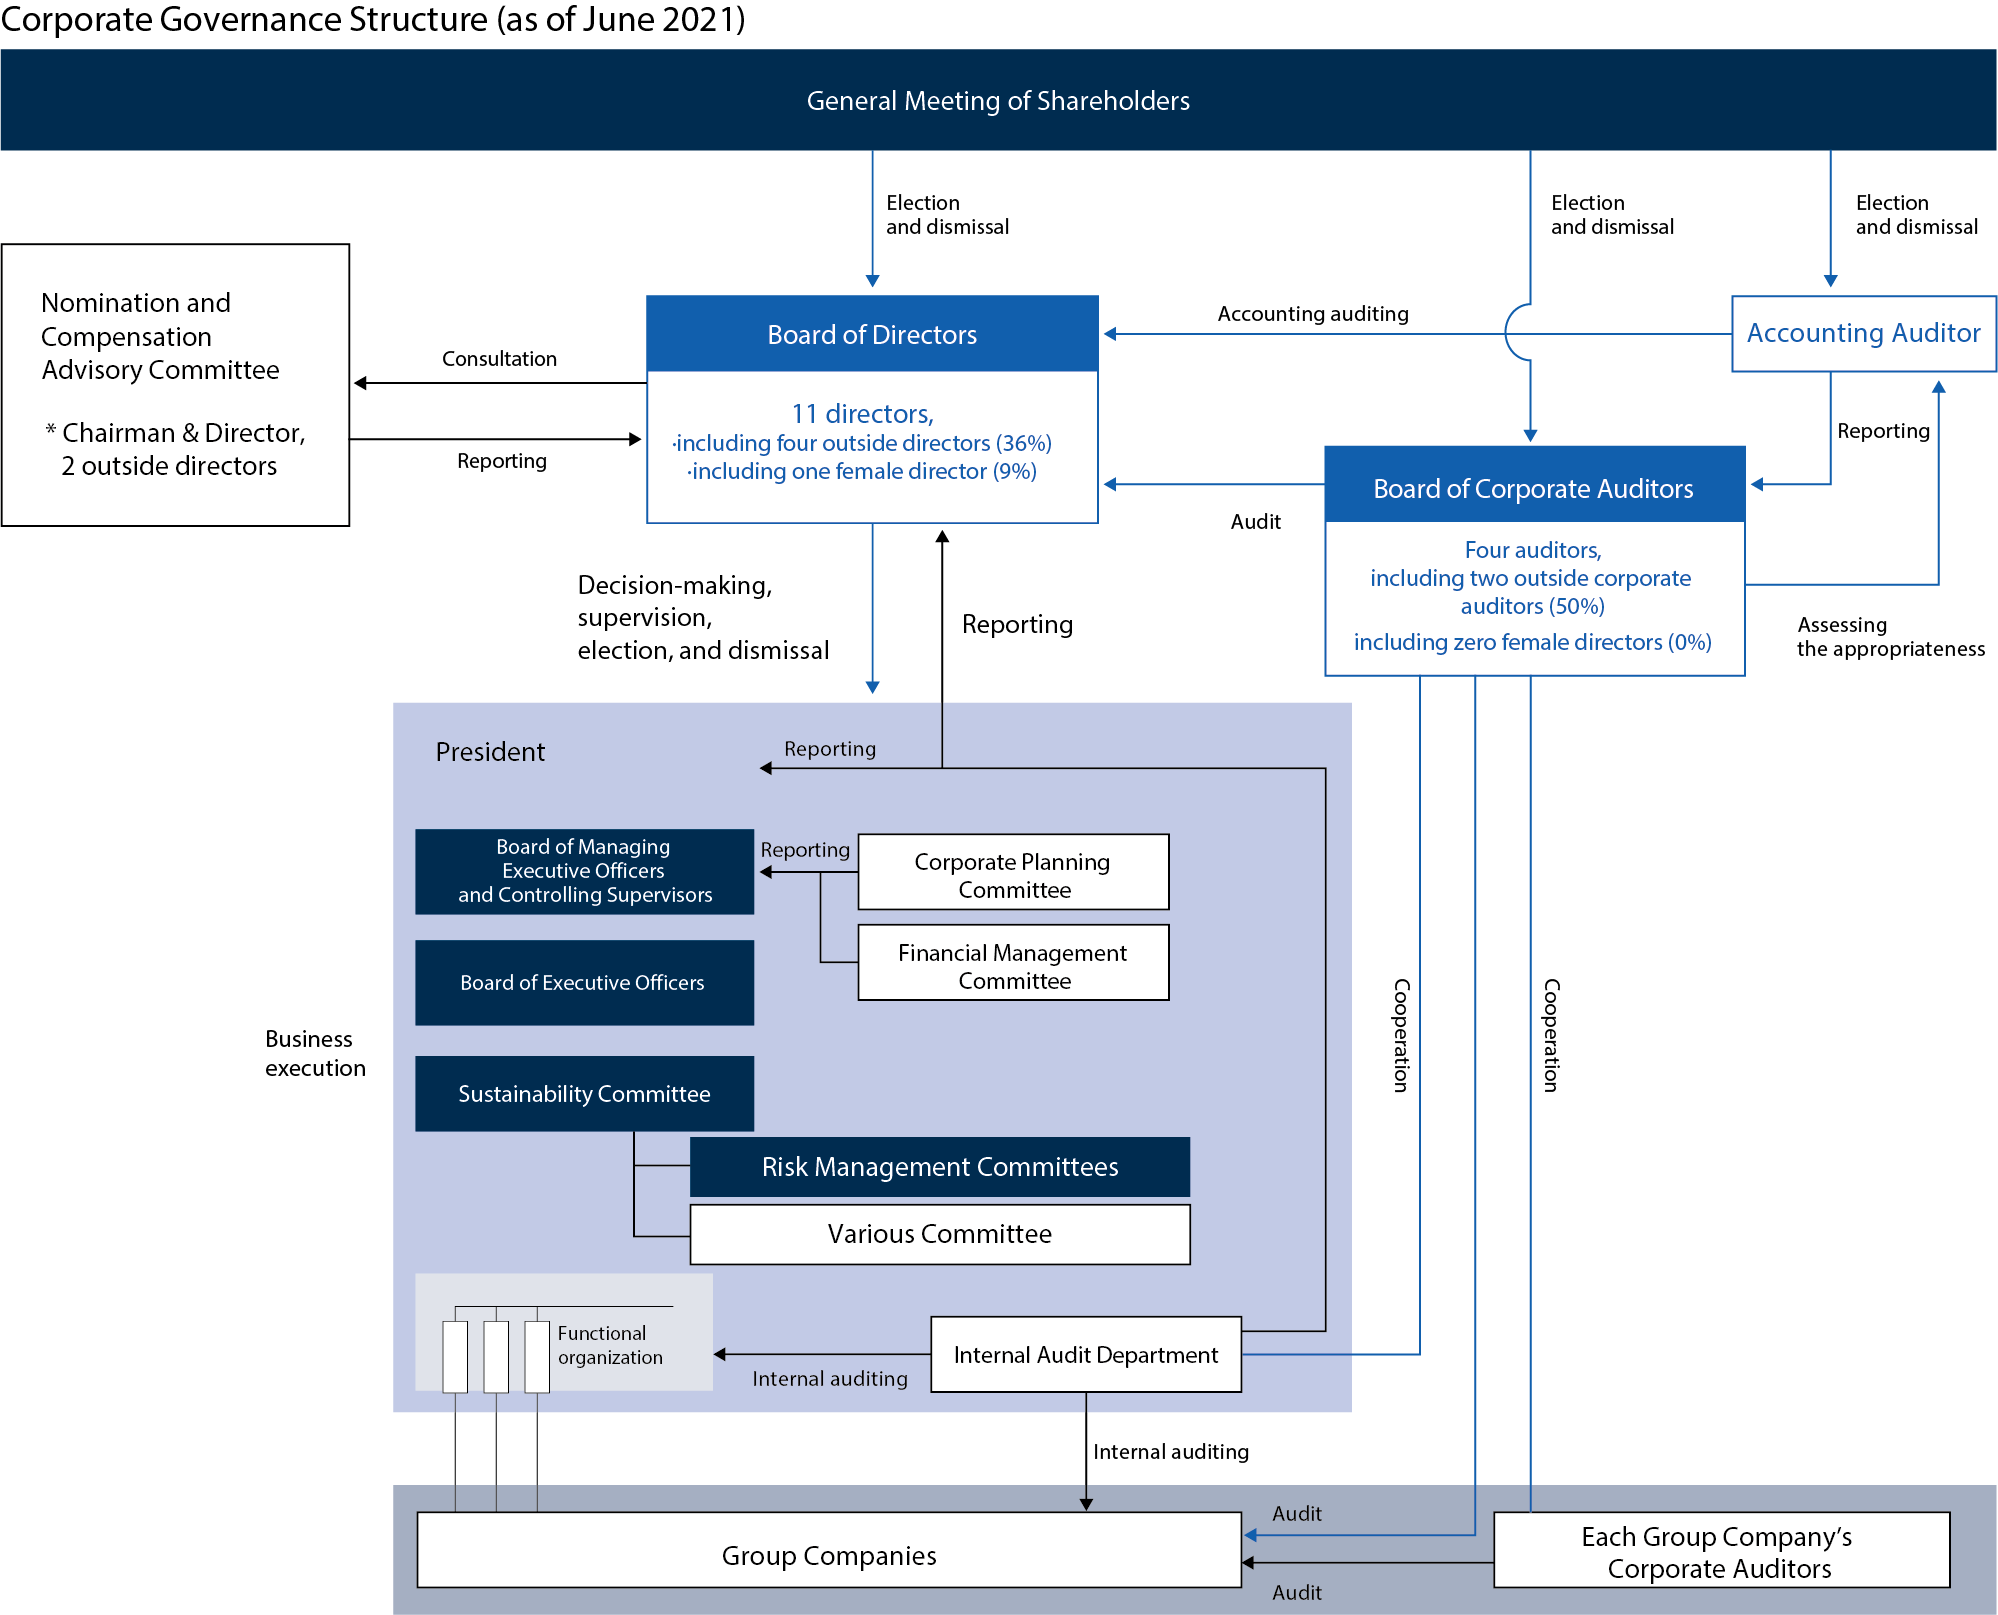 Corporate Governance Structure (as of June 2020)